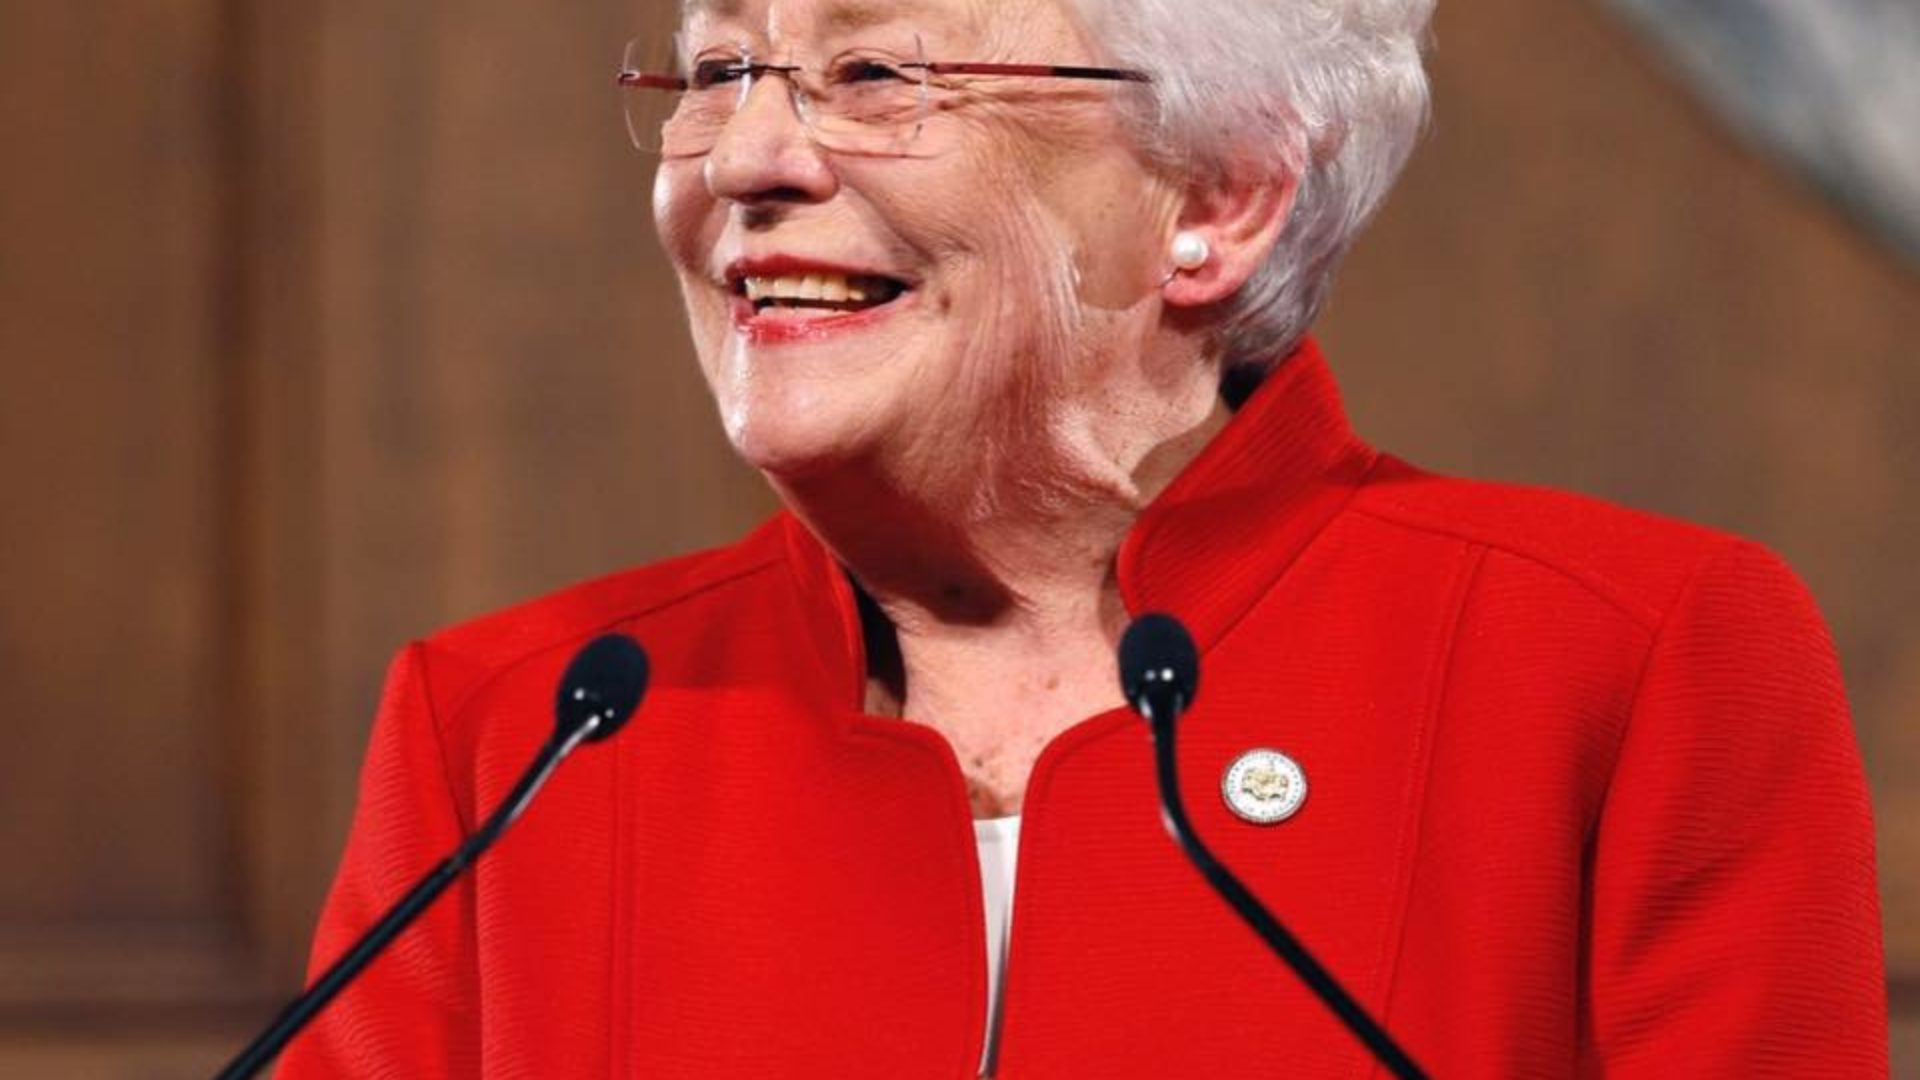 Gov. Kay Ivey Apologizes After 1967 Audio Interview Describes Her Wearing Blackface